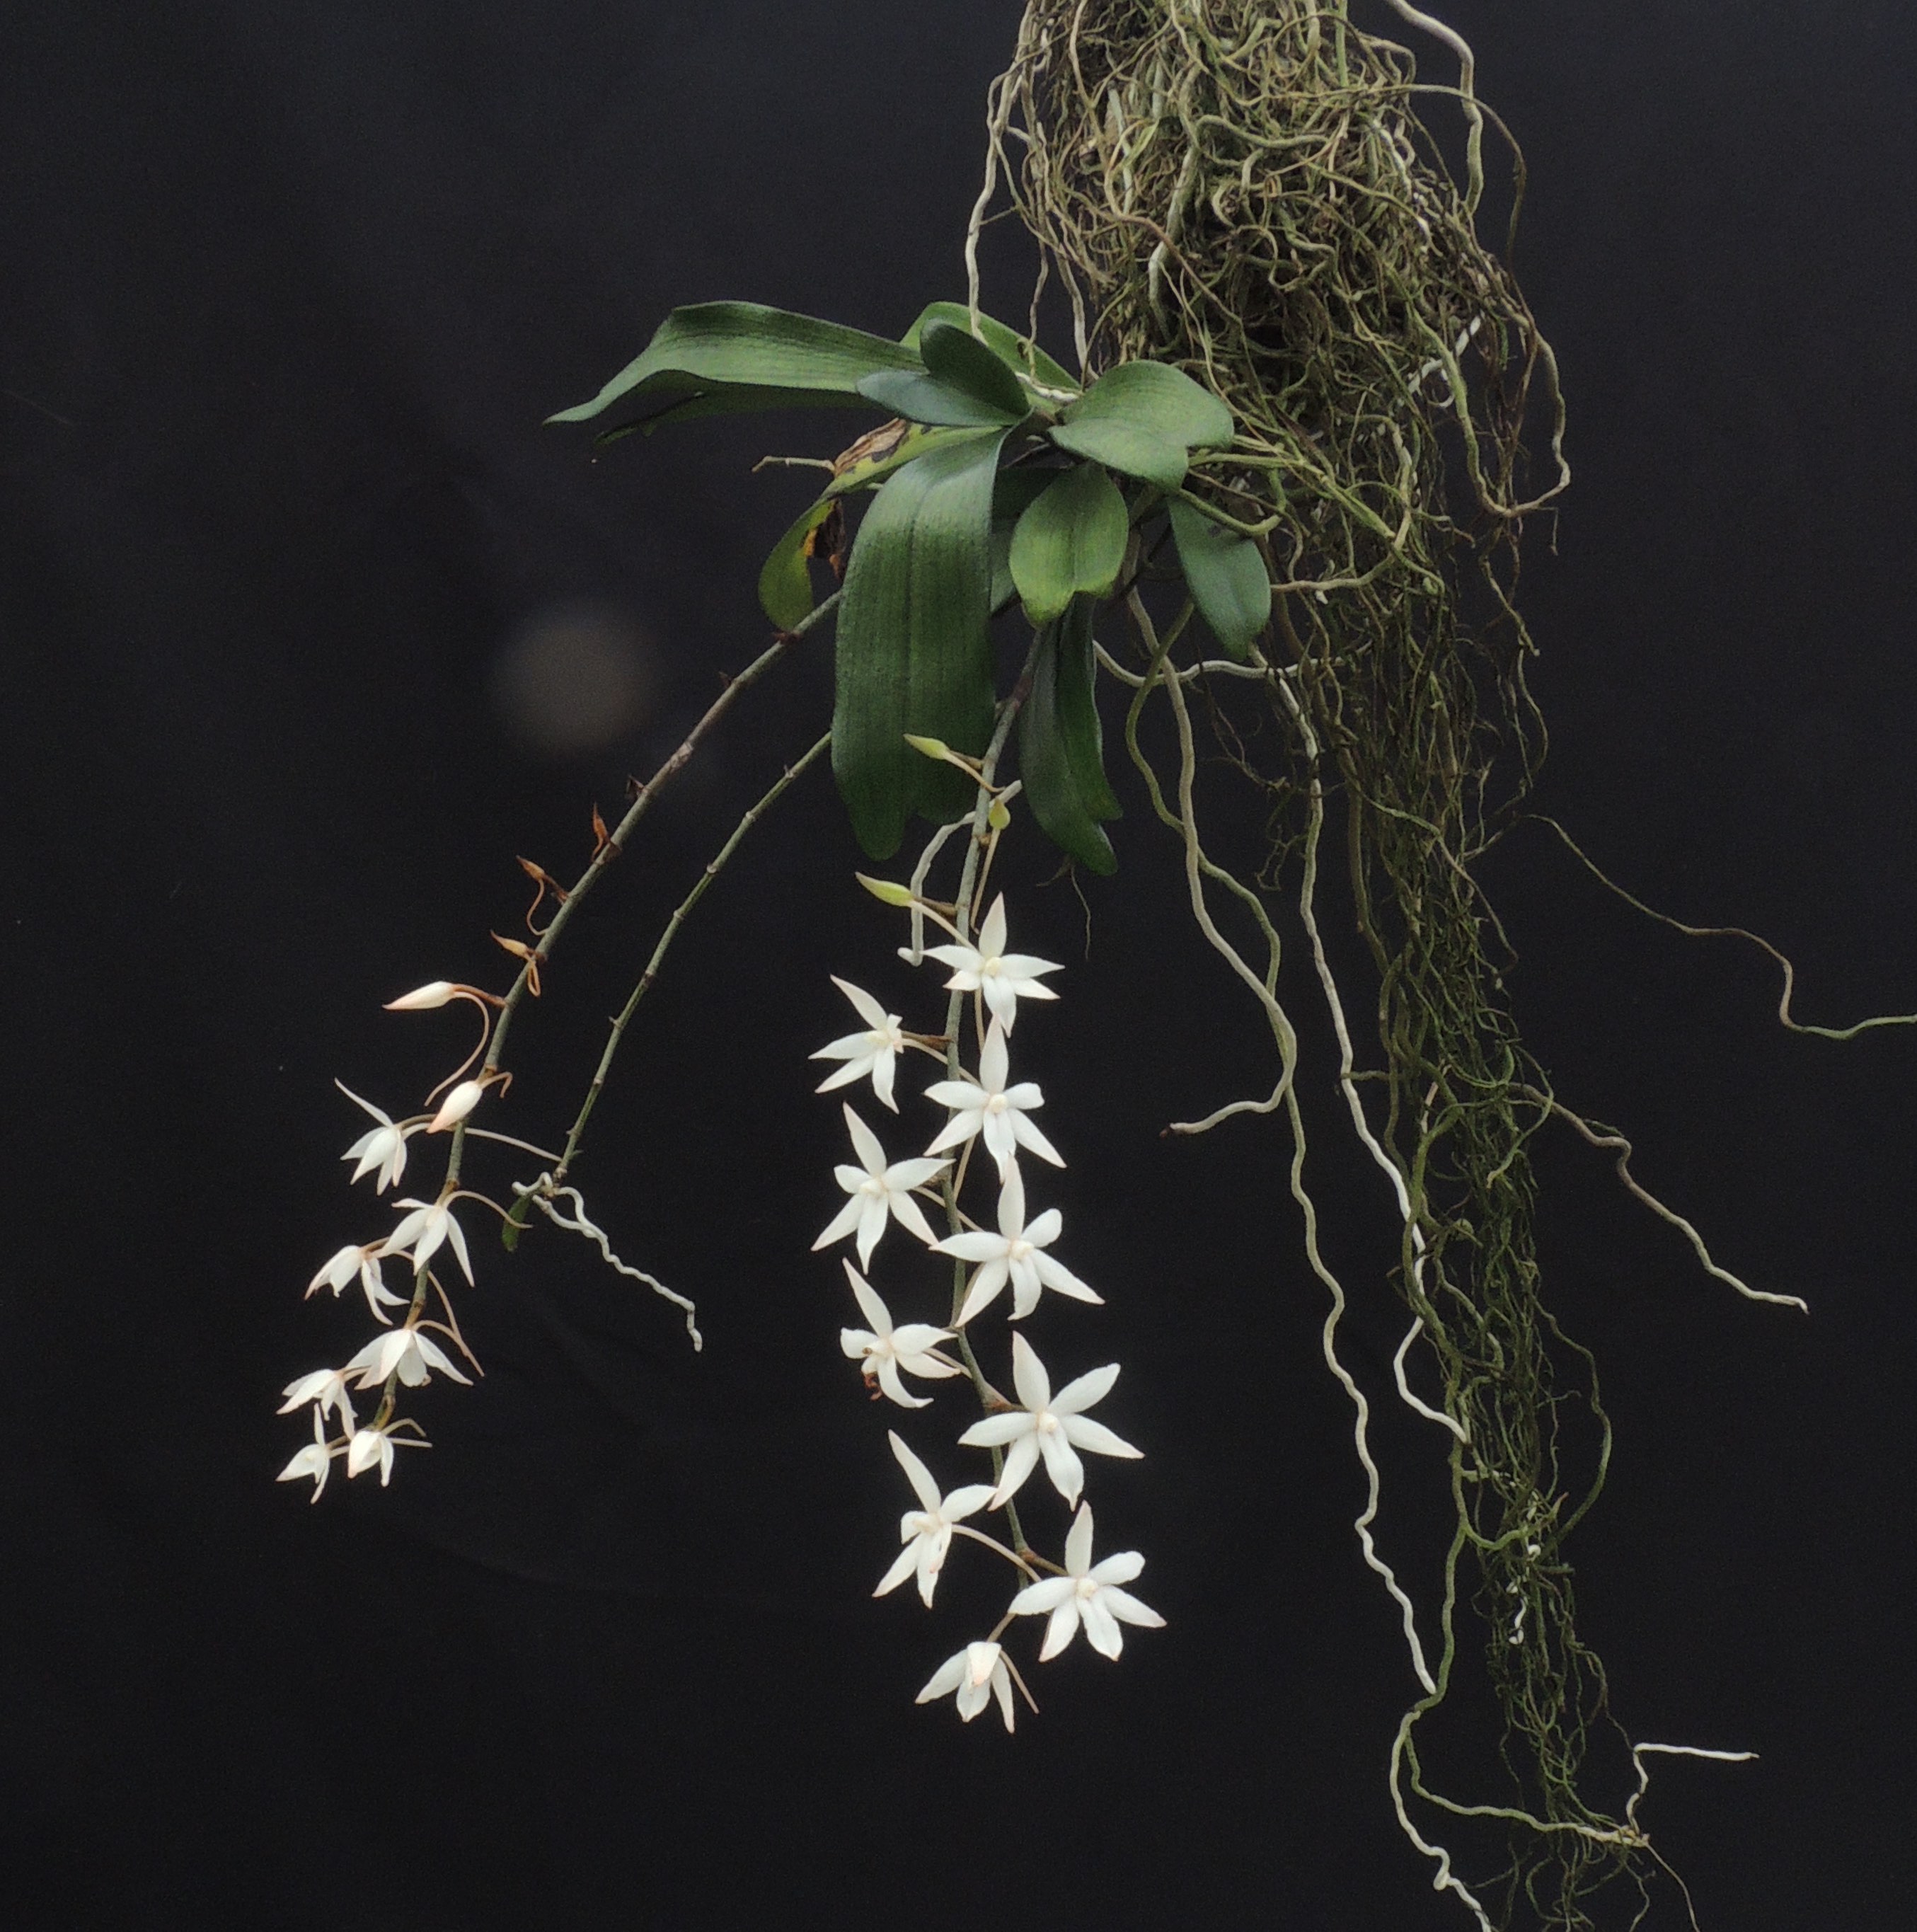 WSBEorchids | The Home of the Writhlington Orchid Project